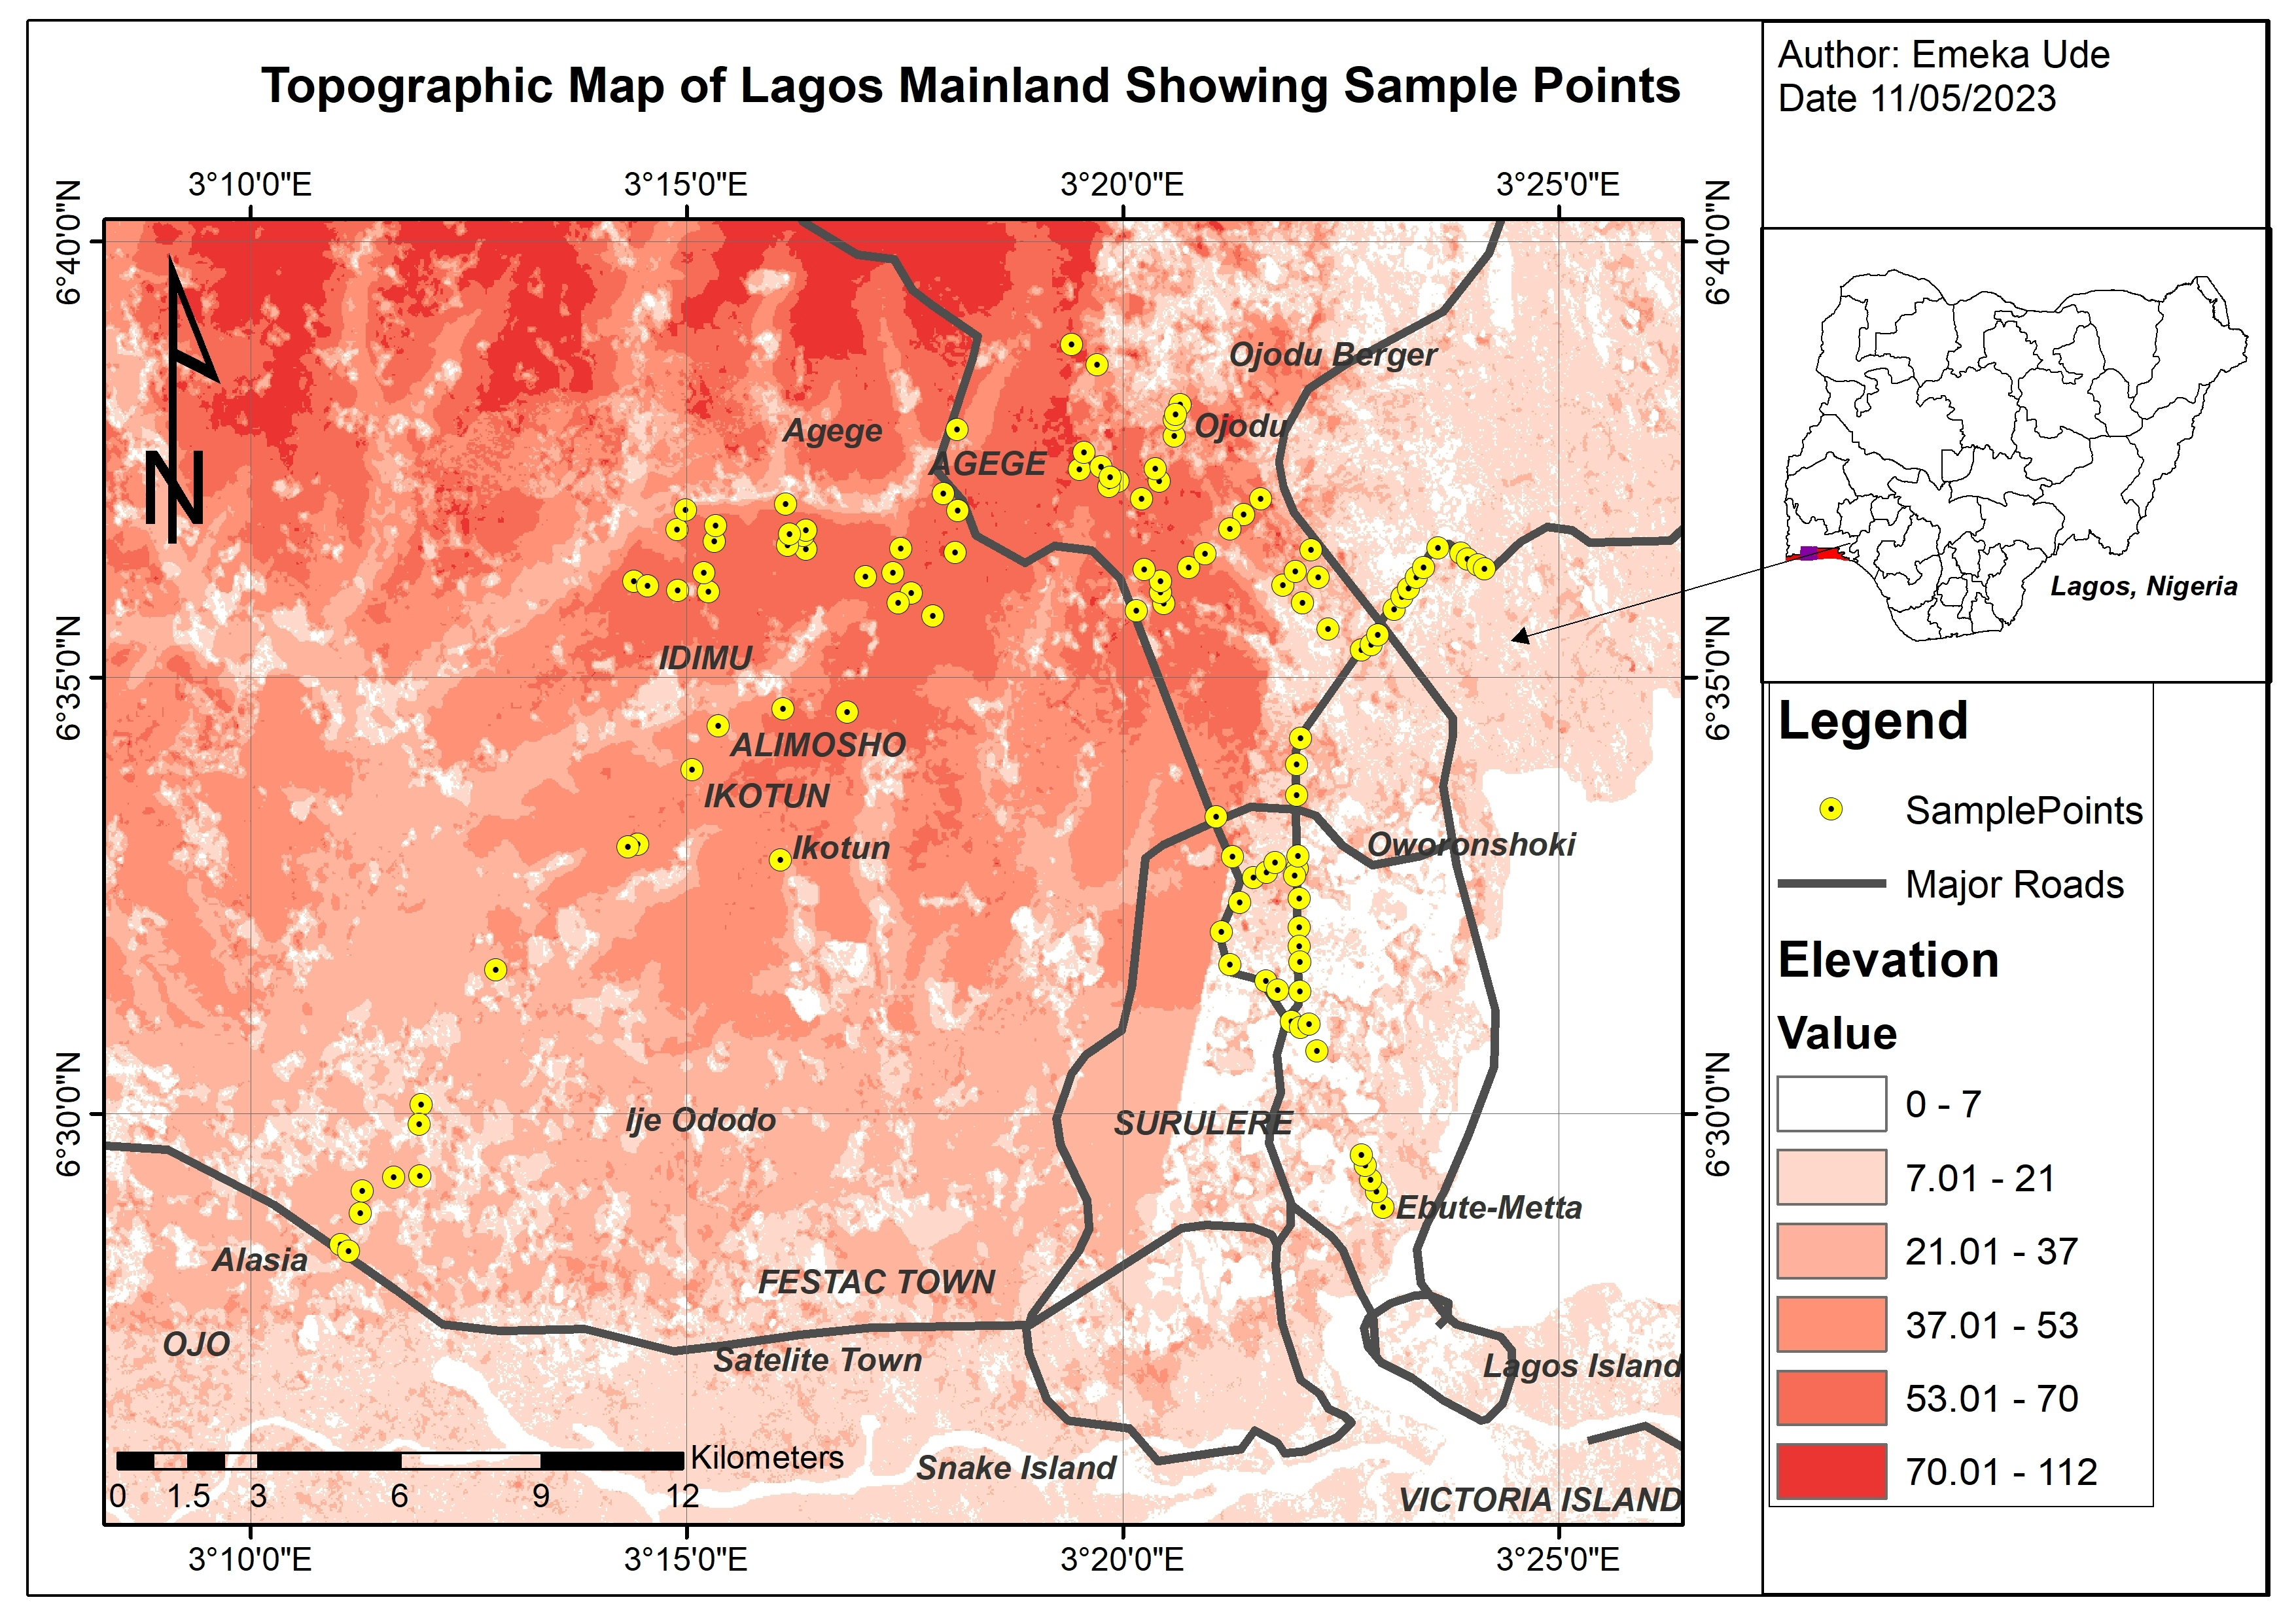 Topographical Map of Lagos Mainland